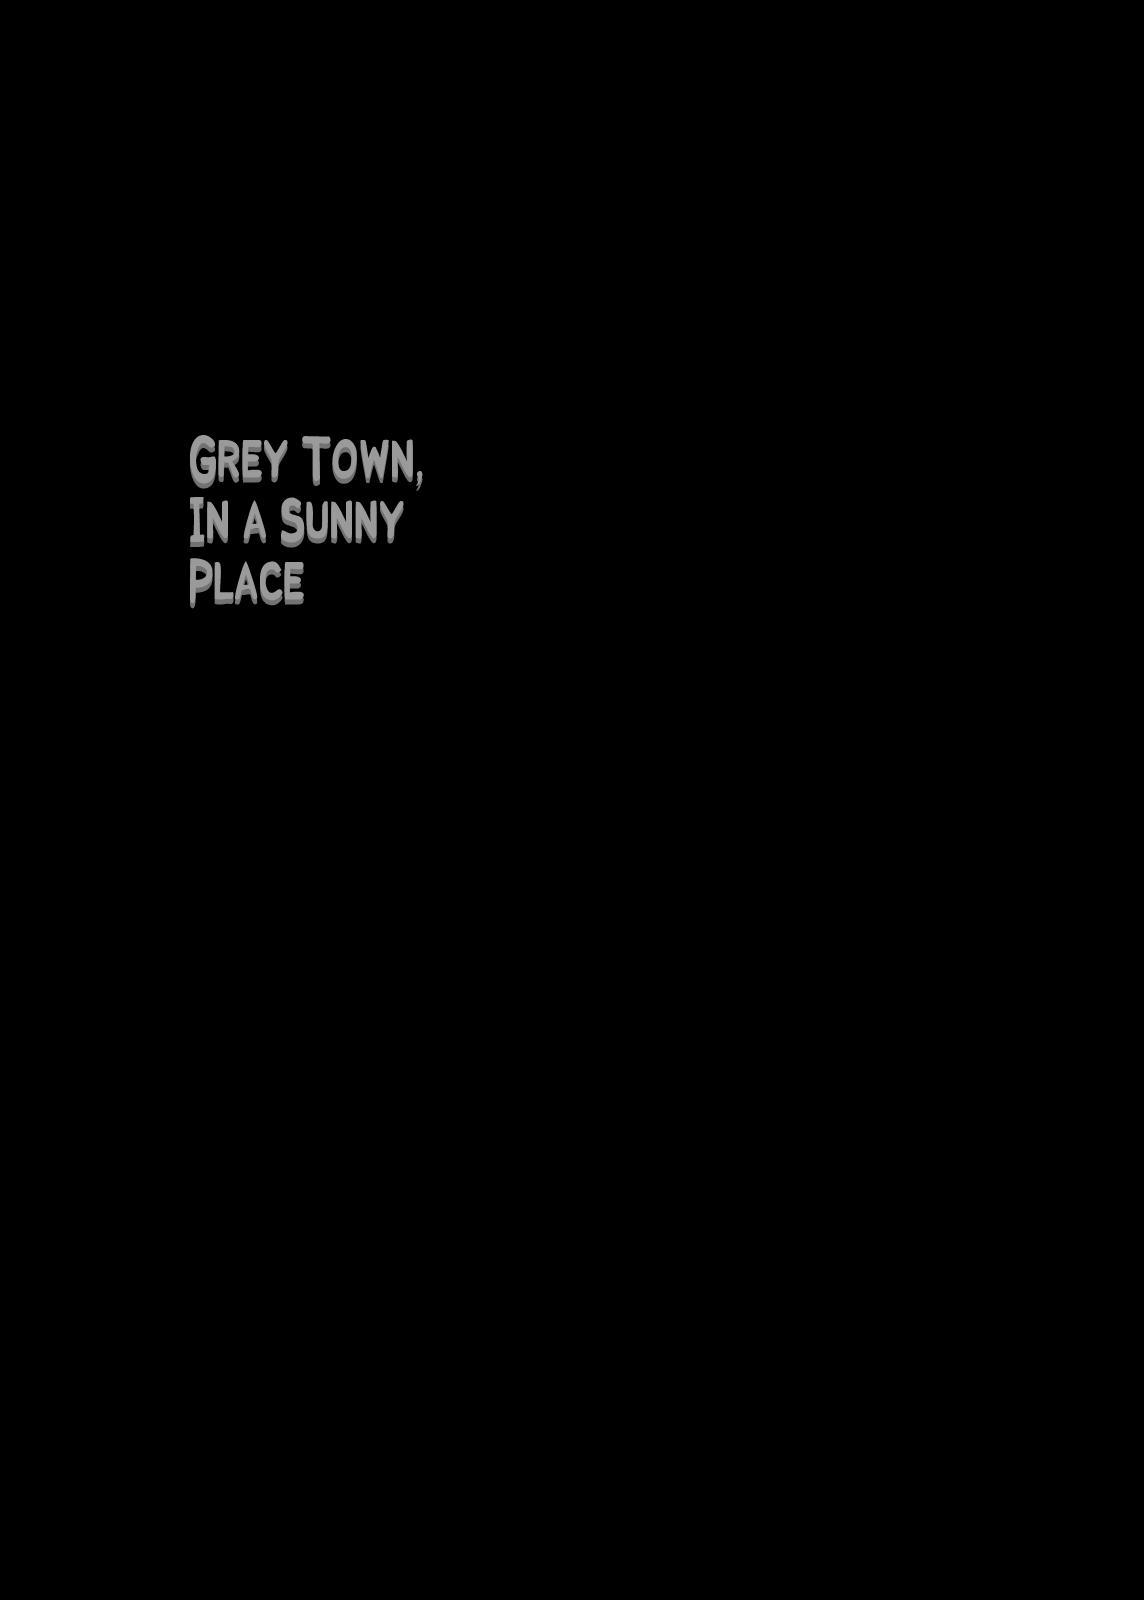 Grey Town, in a Sunny Place 2